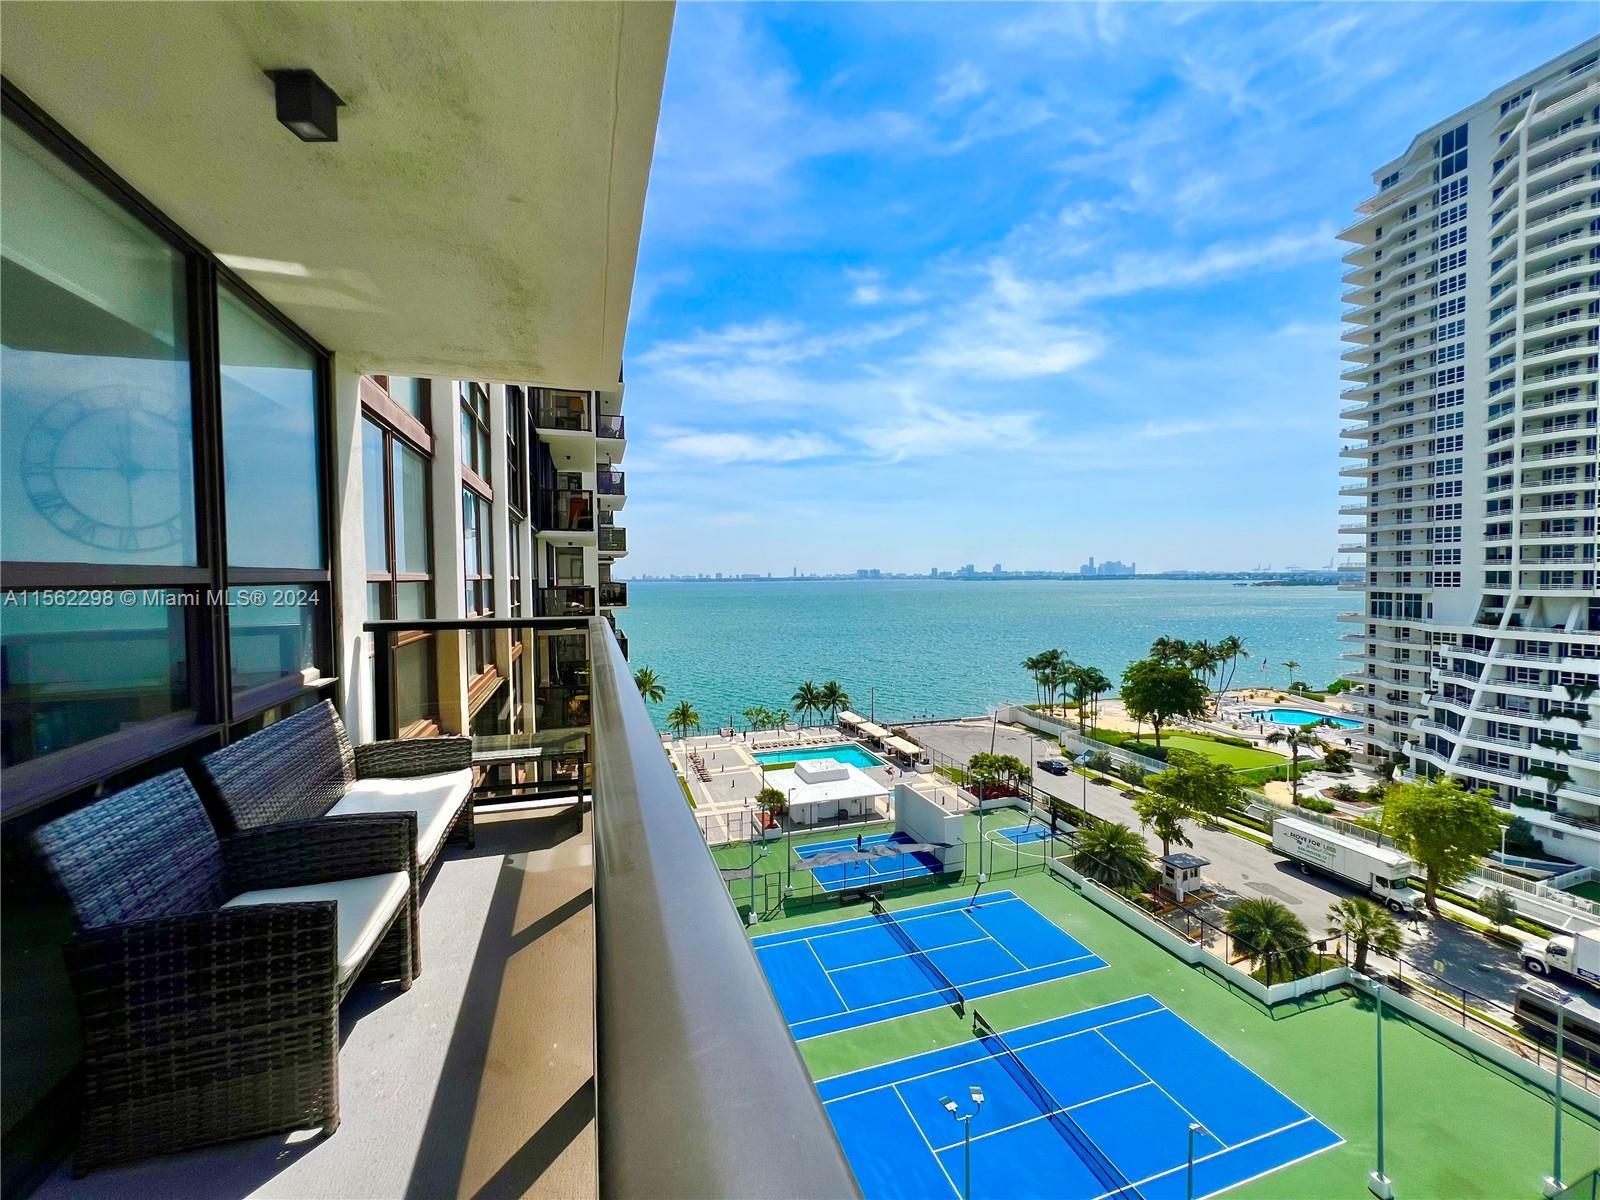 Experience the epitome of Miami living at The Charter Club! Embrace the vibrant energy of Midtown Mi